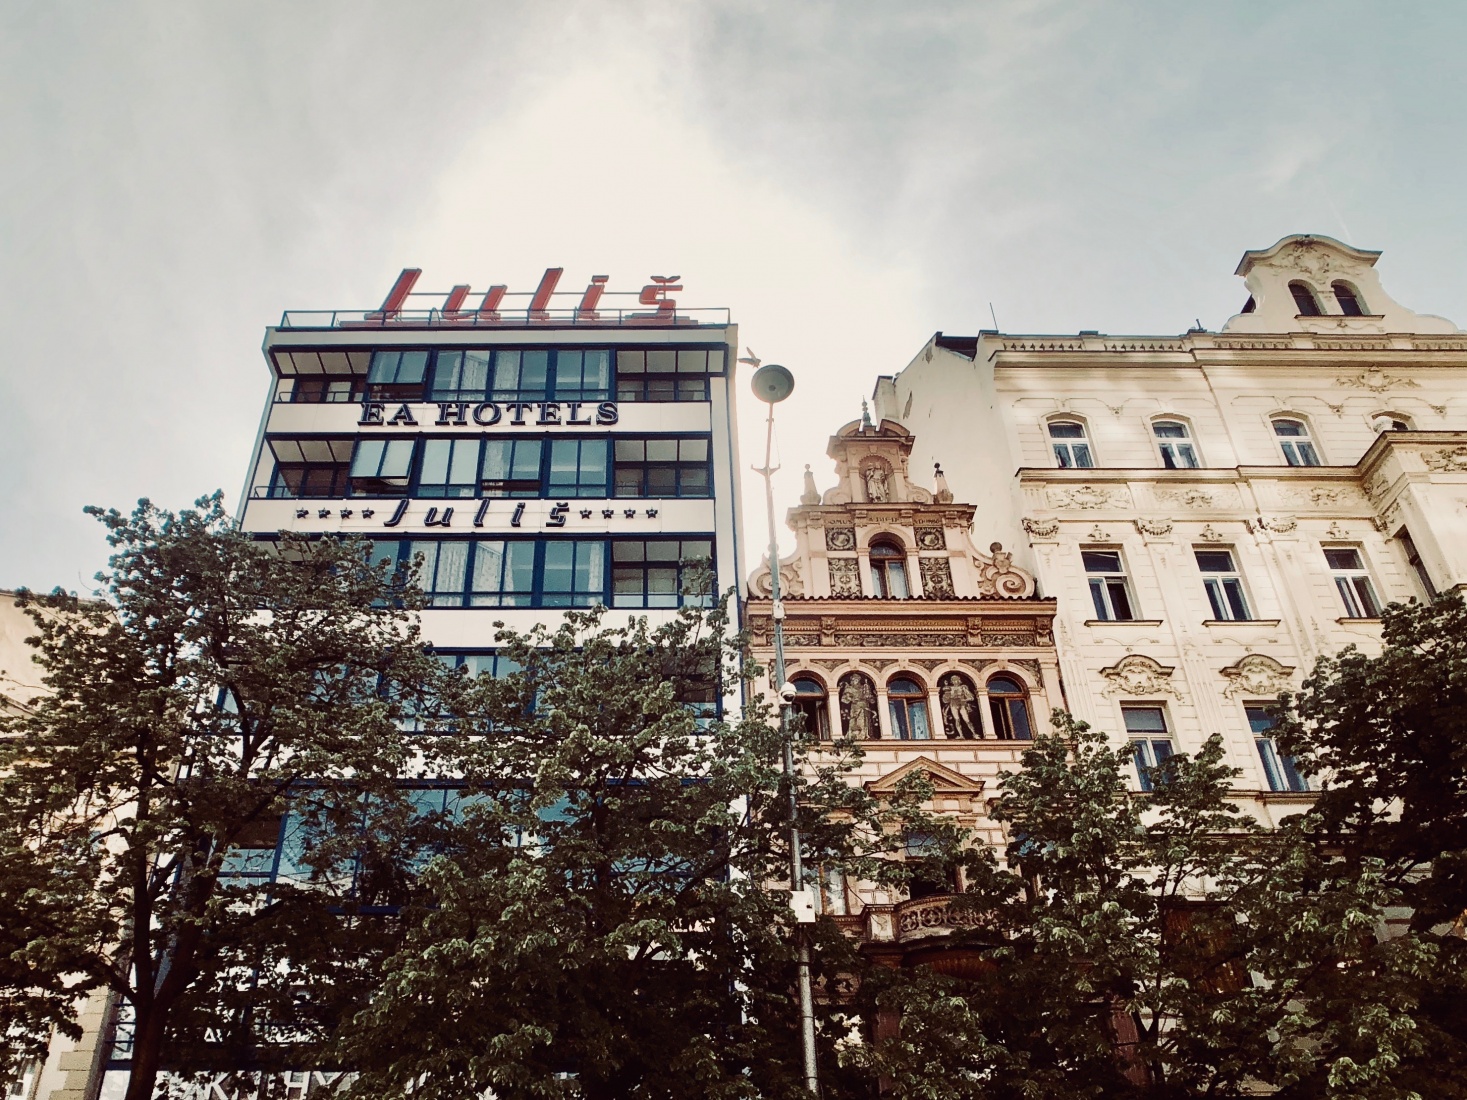 Hotel Juliš, a building from the Functionalist movement of architecture from 1932, in central Wenceslas Square, Prague. Immediately to the right is a 19th century Neo Renaissance palais.